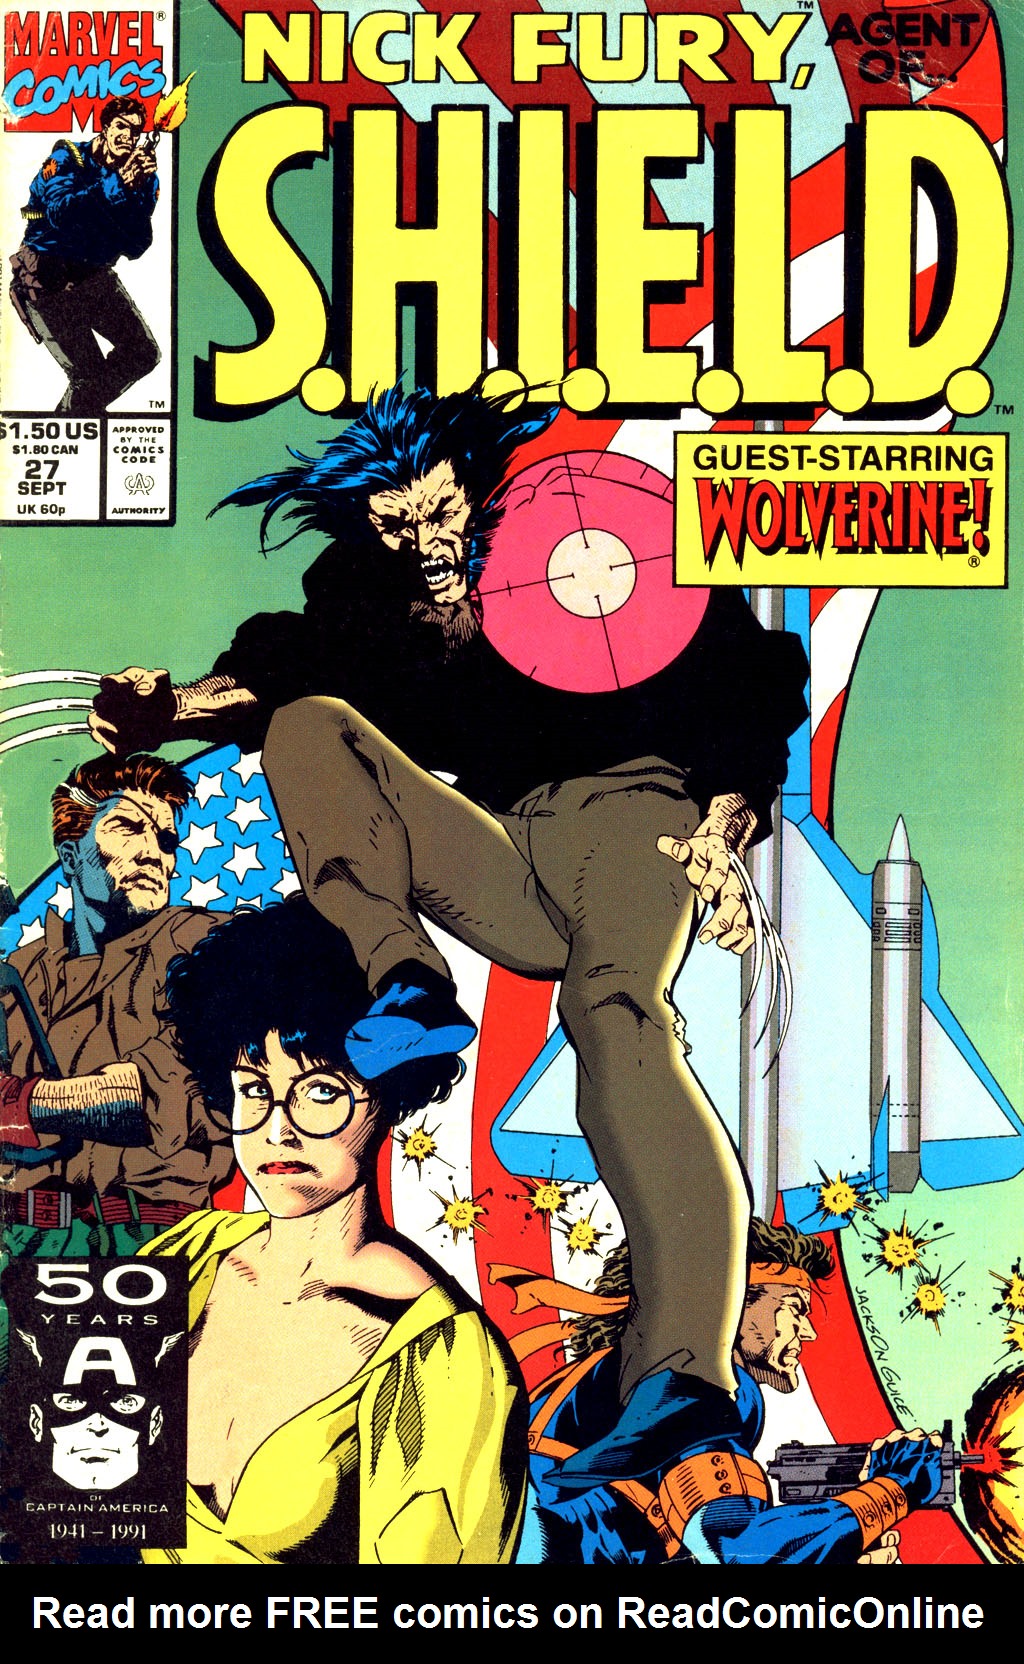 Read online Nick Fury, Agent of S.H.I.E.L.D. comic -  Issue #27 - 1